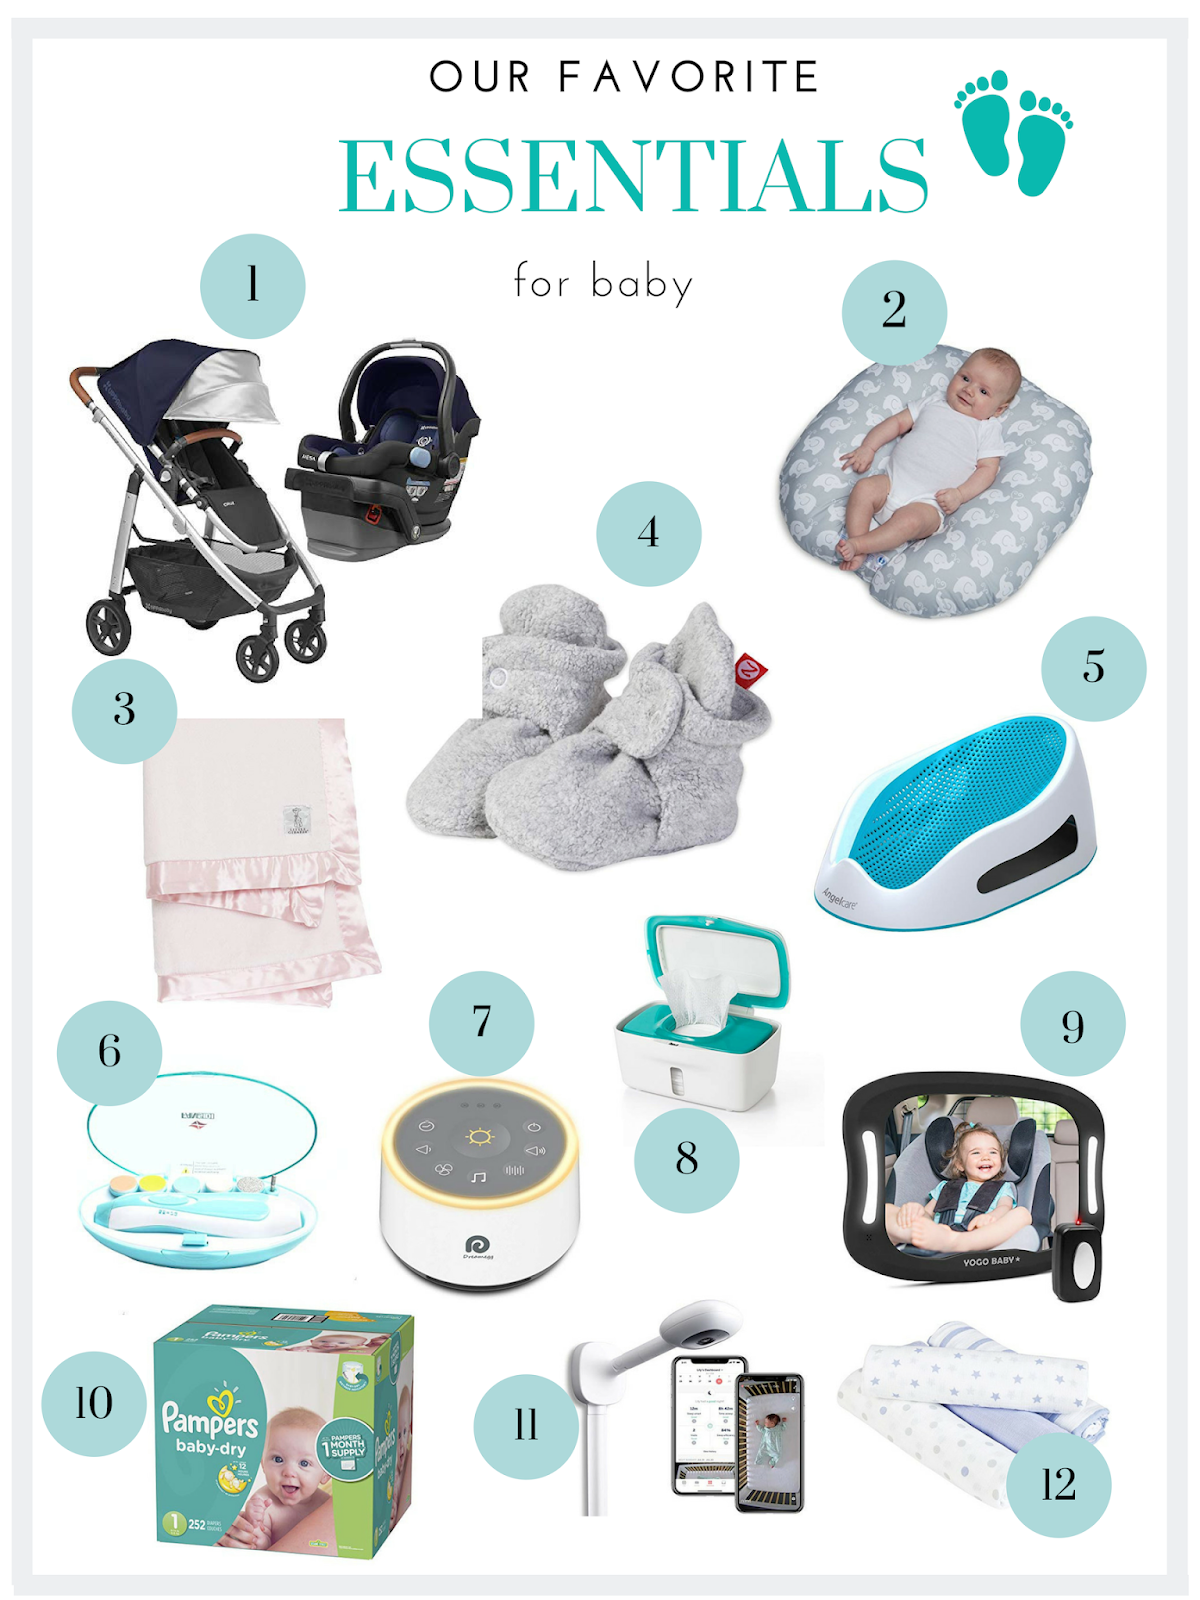 Baby Essentials and Favorites 